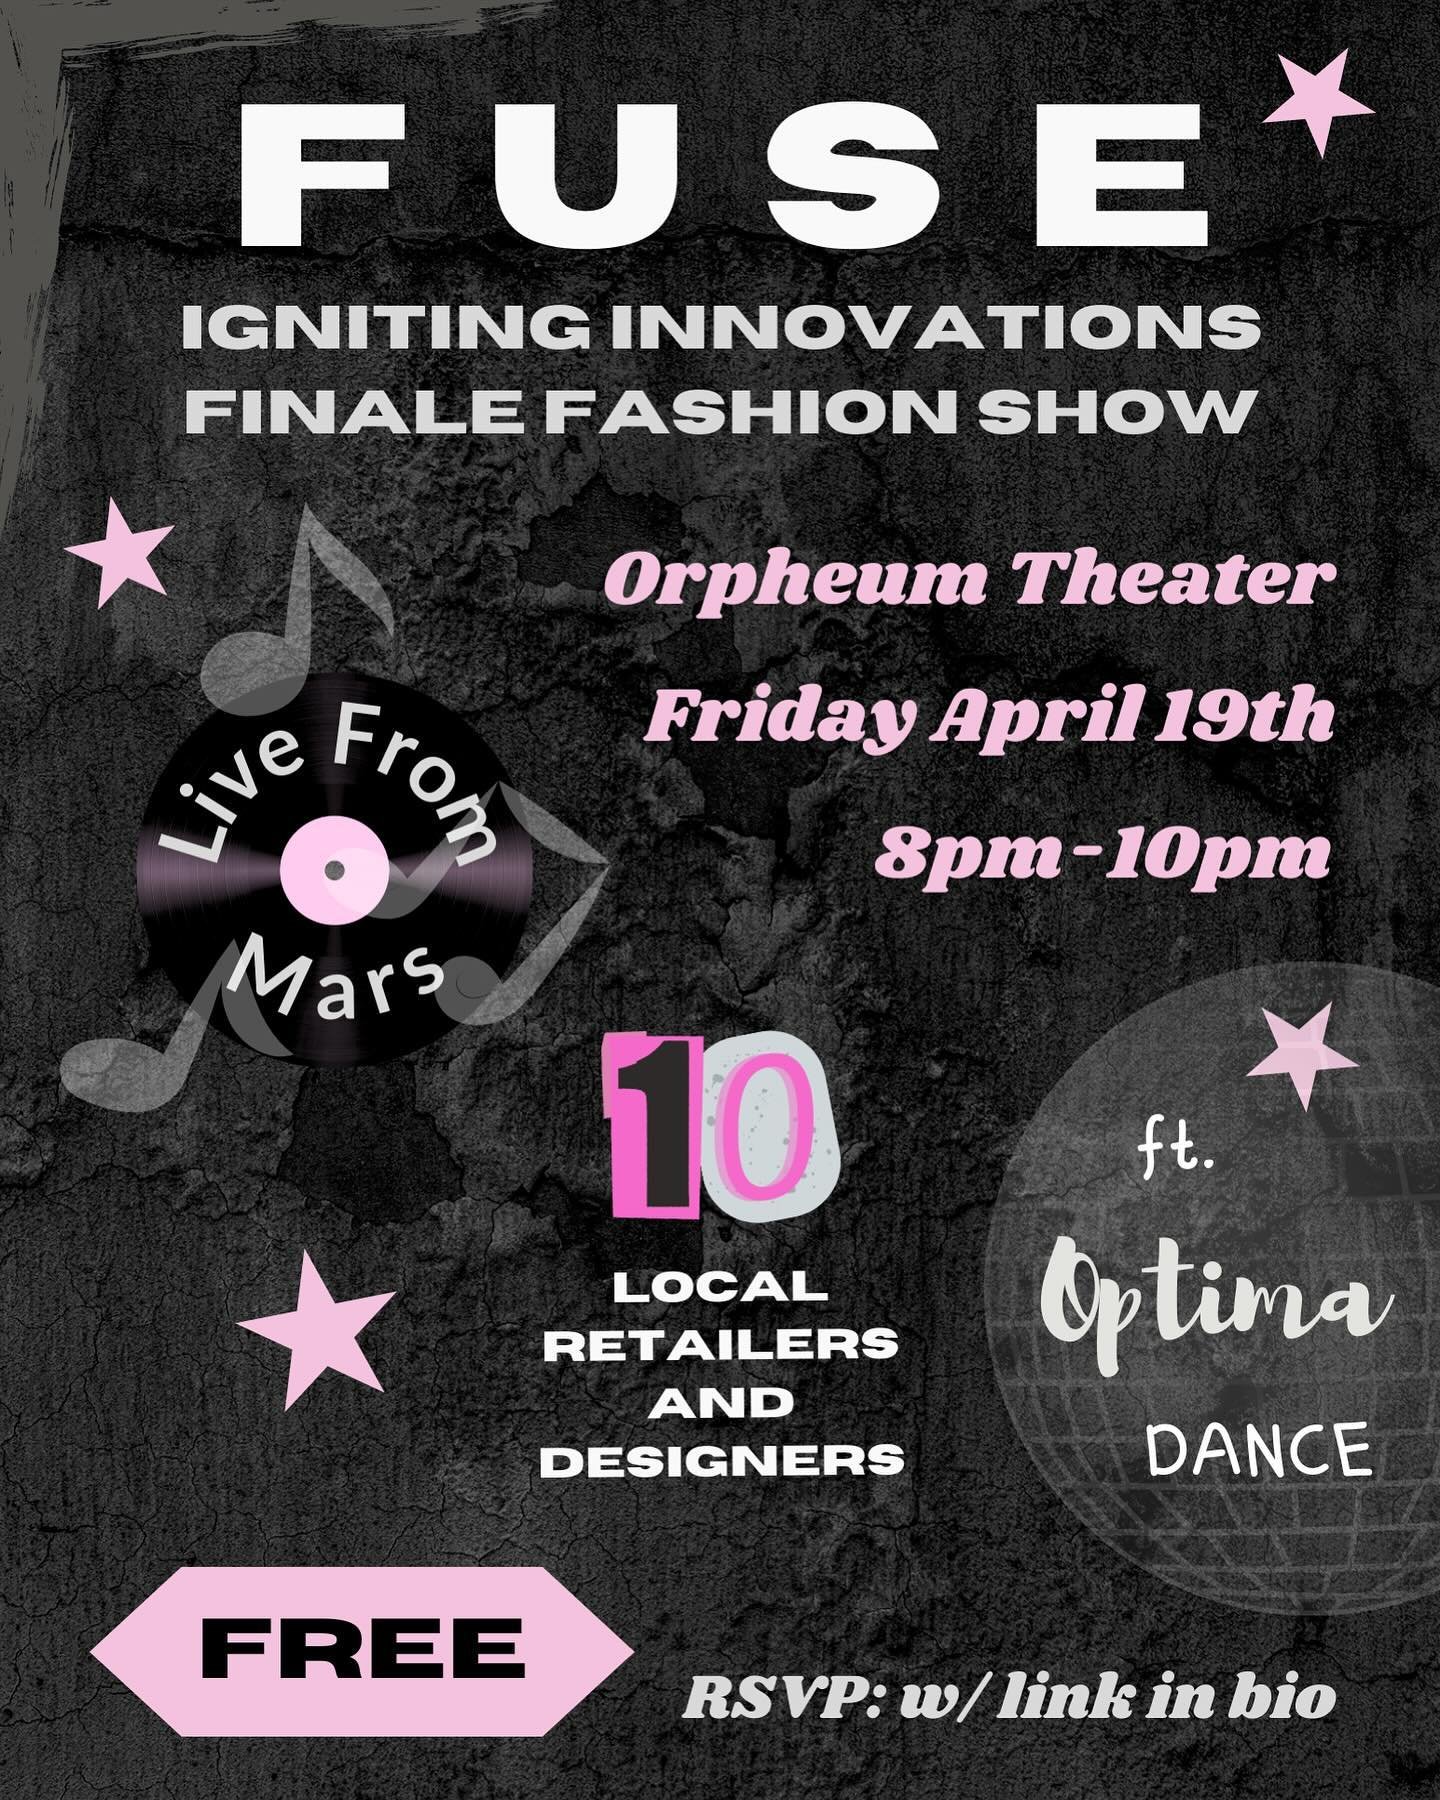 6 hours. Be there. 

Fuse: Igniting Innovation is the culmination of UW fashion week, where we will celebrate the incredible artistry of the Madison community. 

Tonight at 8 at the Orpheum Theater. Featuring preformances by @livefrommarsband and @op